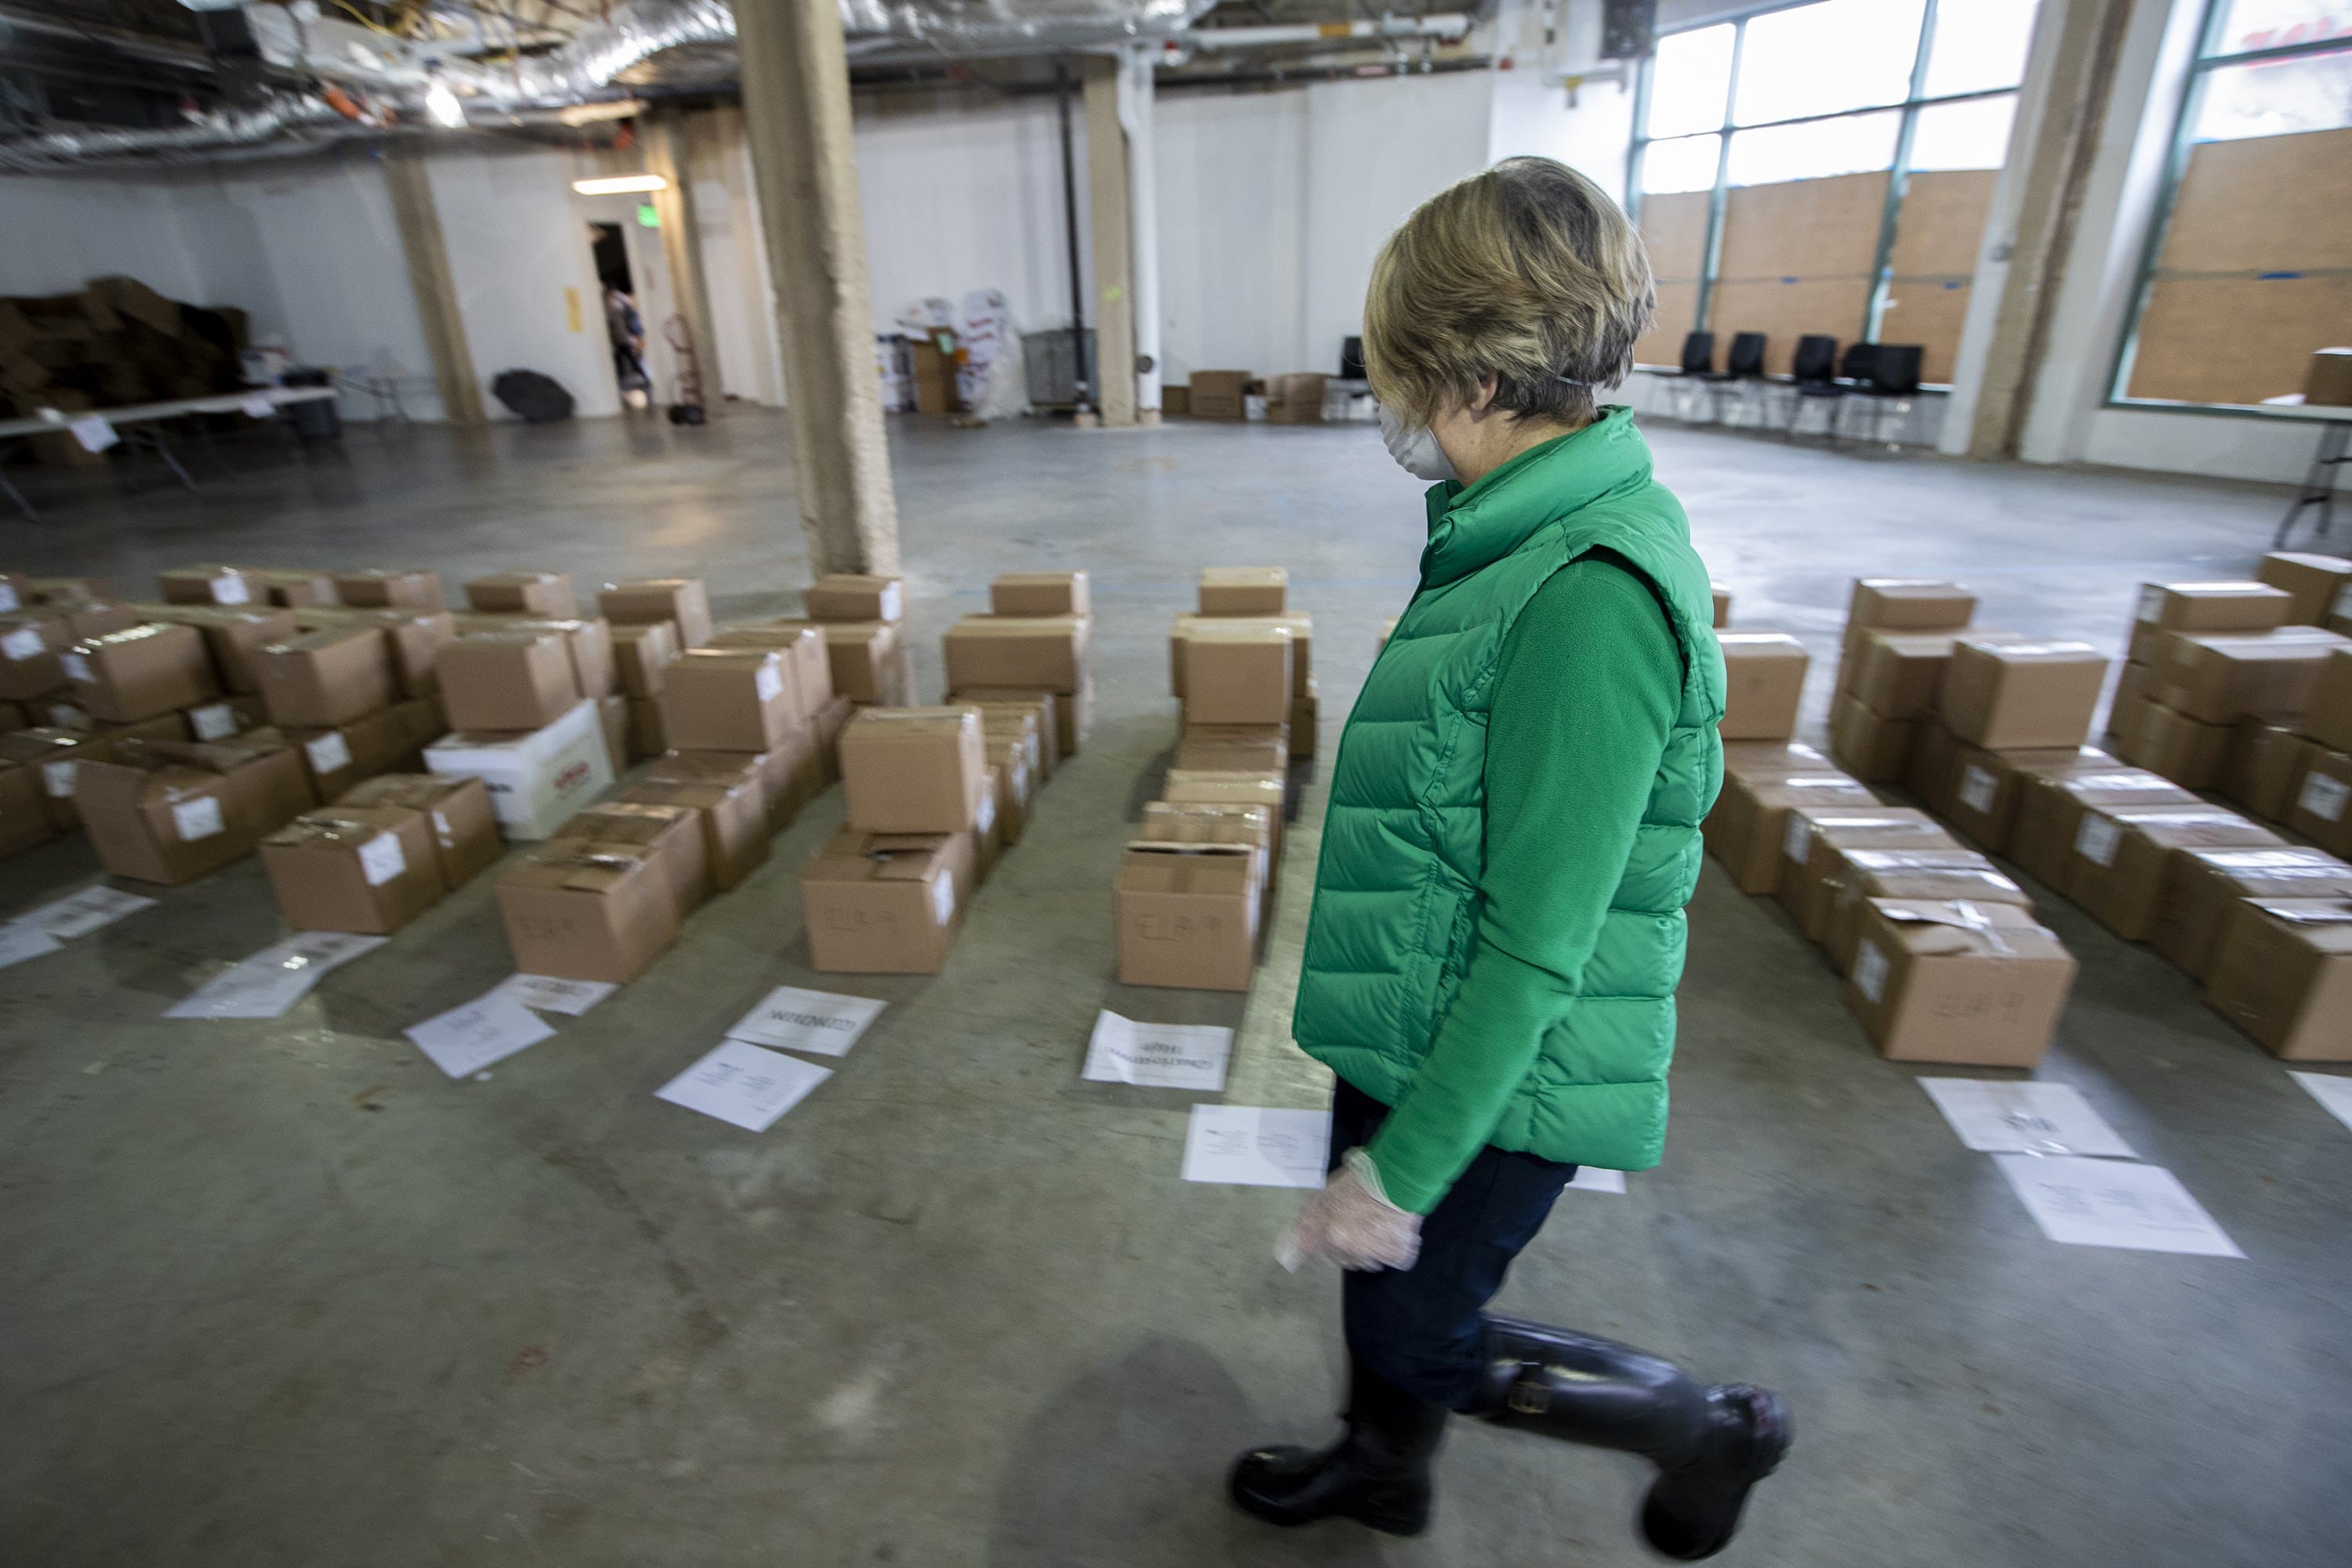 A worker examines boxed up course material for each student to resume their coursework for the next two weeks with the Chomebook they will receive. (Jesse Costa/WBUR)